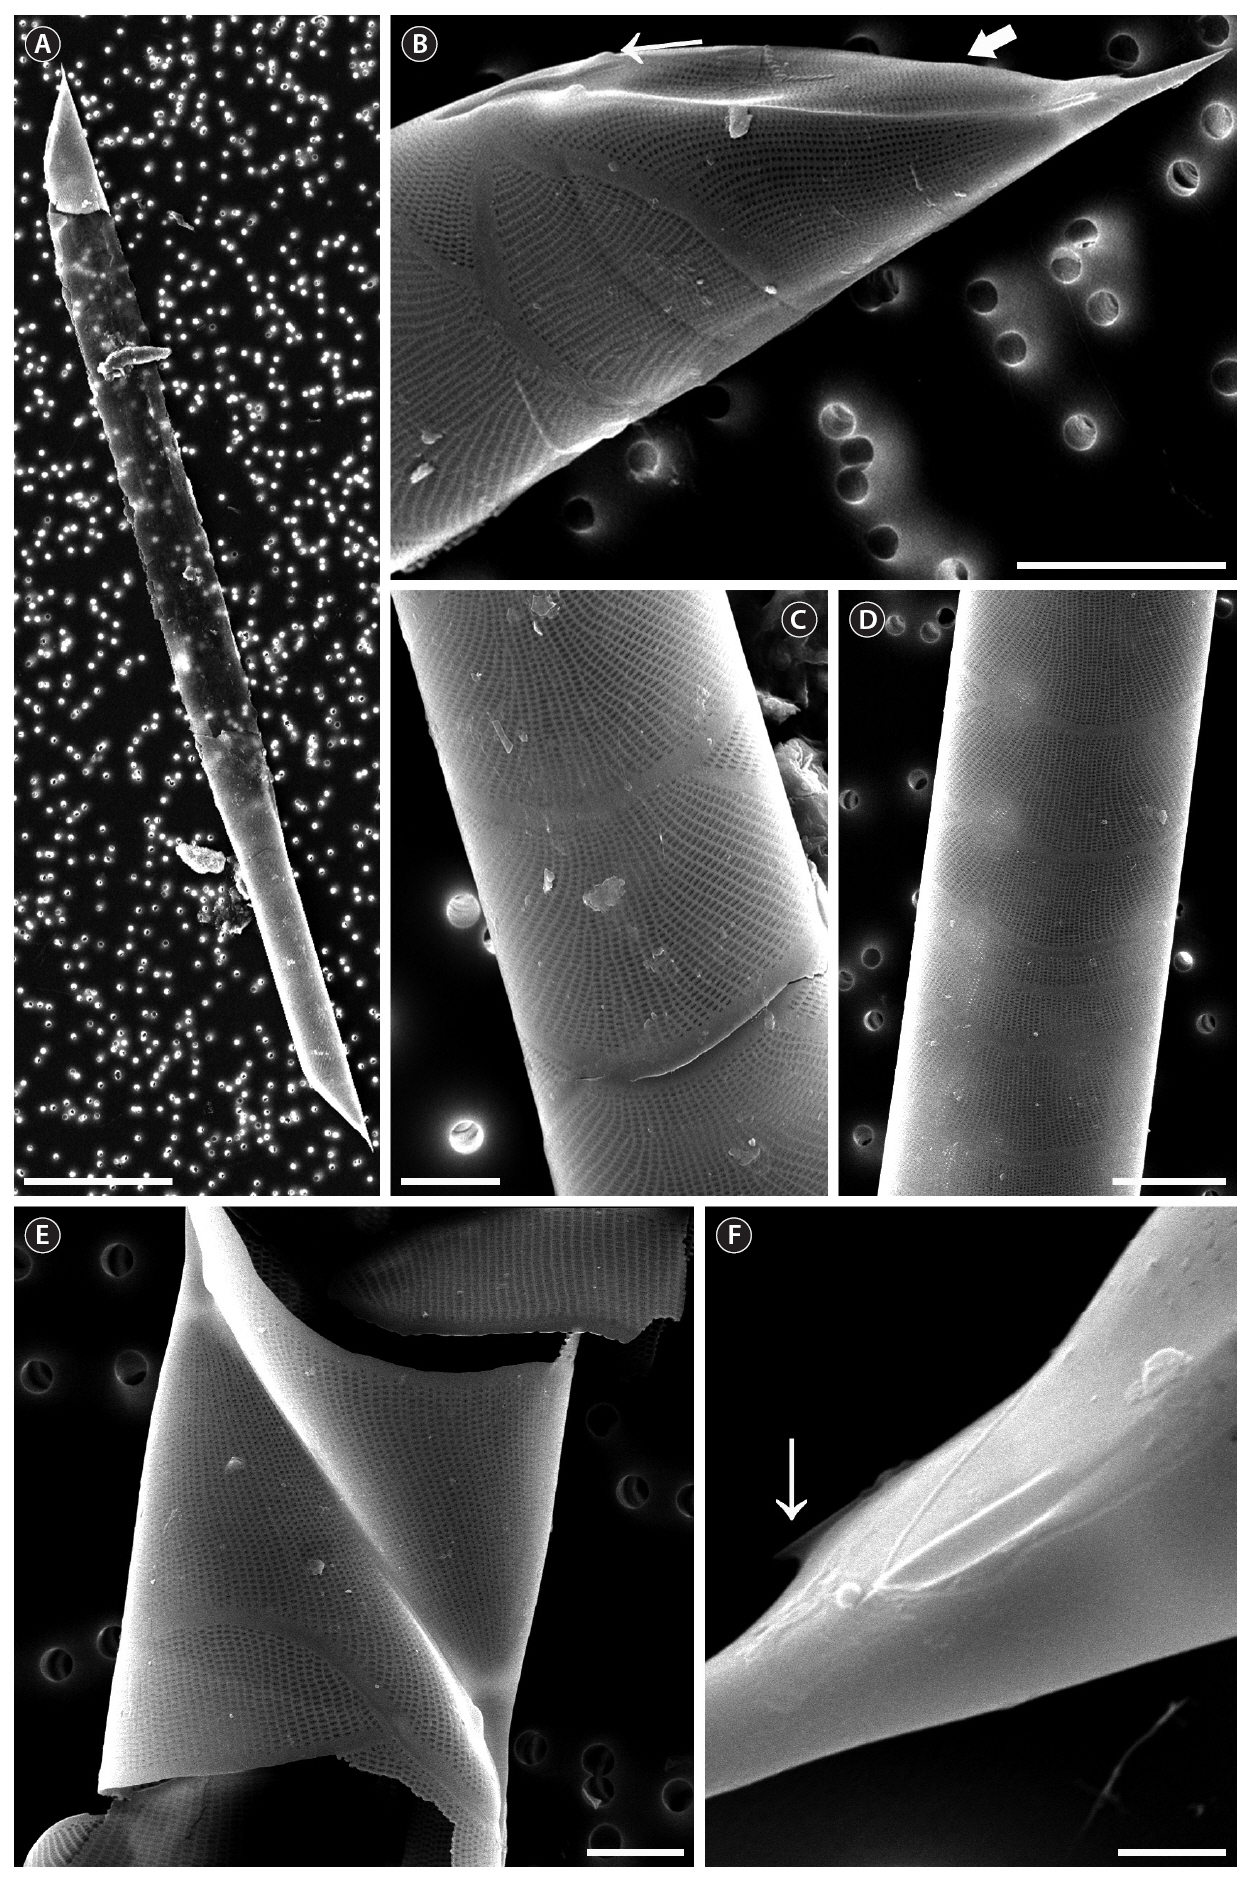 Rhizosolenia sp. 1. (A) A collapsed cell with ventral part much longer than dorsal part scanning electron microscopy (SEM). (B) Clasper (thin arrow) and contiguous area (thick arrow) SEM. (C) Detail of girdle segments with striation straight in central area and curved in marginal area SEM. (D) Girdle segments SEM. (E) Connection between two cells SEM. (F) Detail of otaria (arrow) SEM. Scale bars represent: A 50 ㎛; B & D 10 ㎛; C & E 5 ㎛; F 1 ㎛.